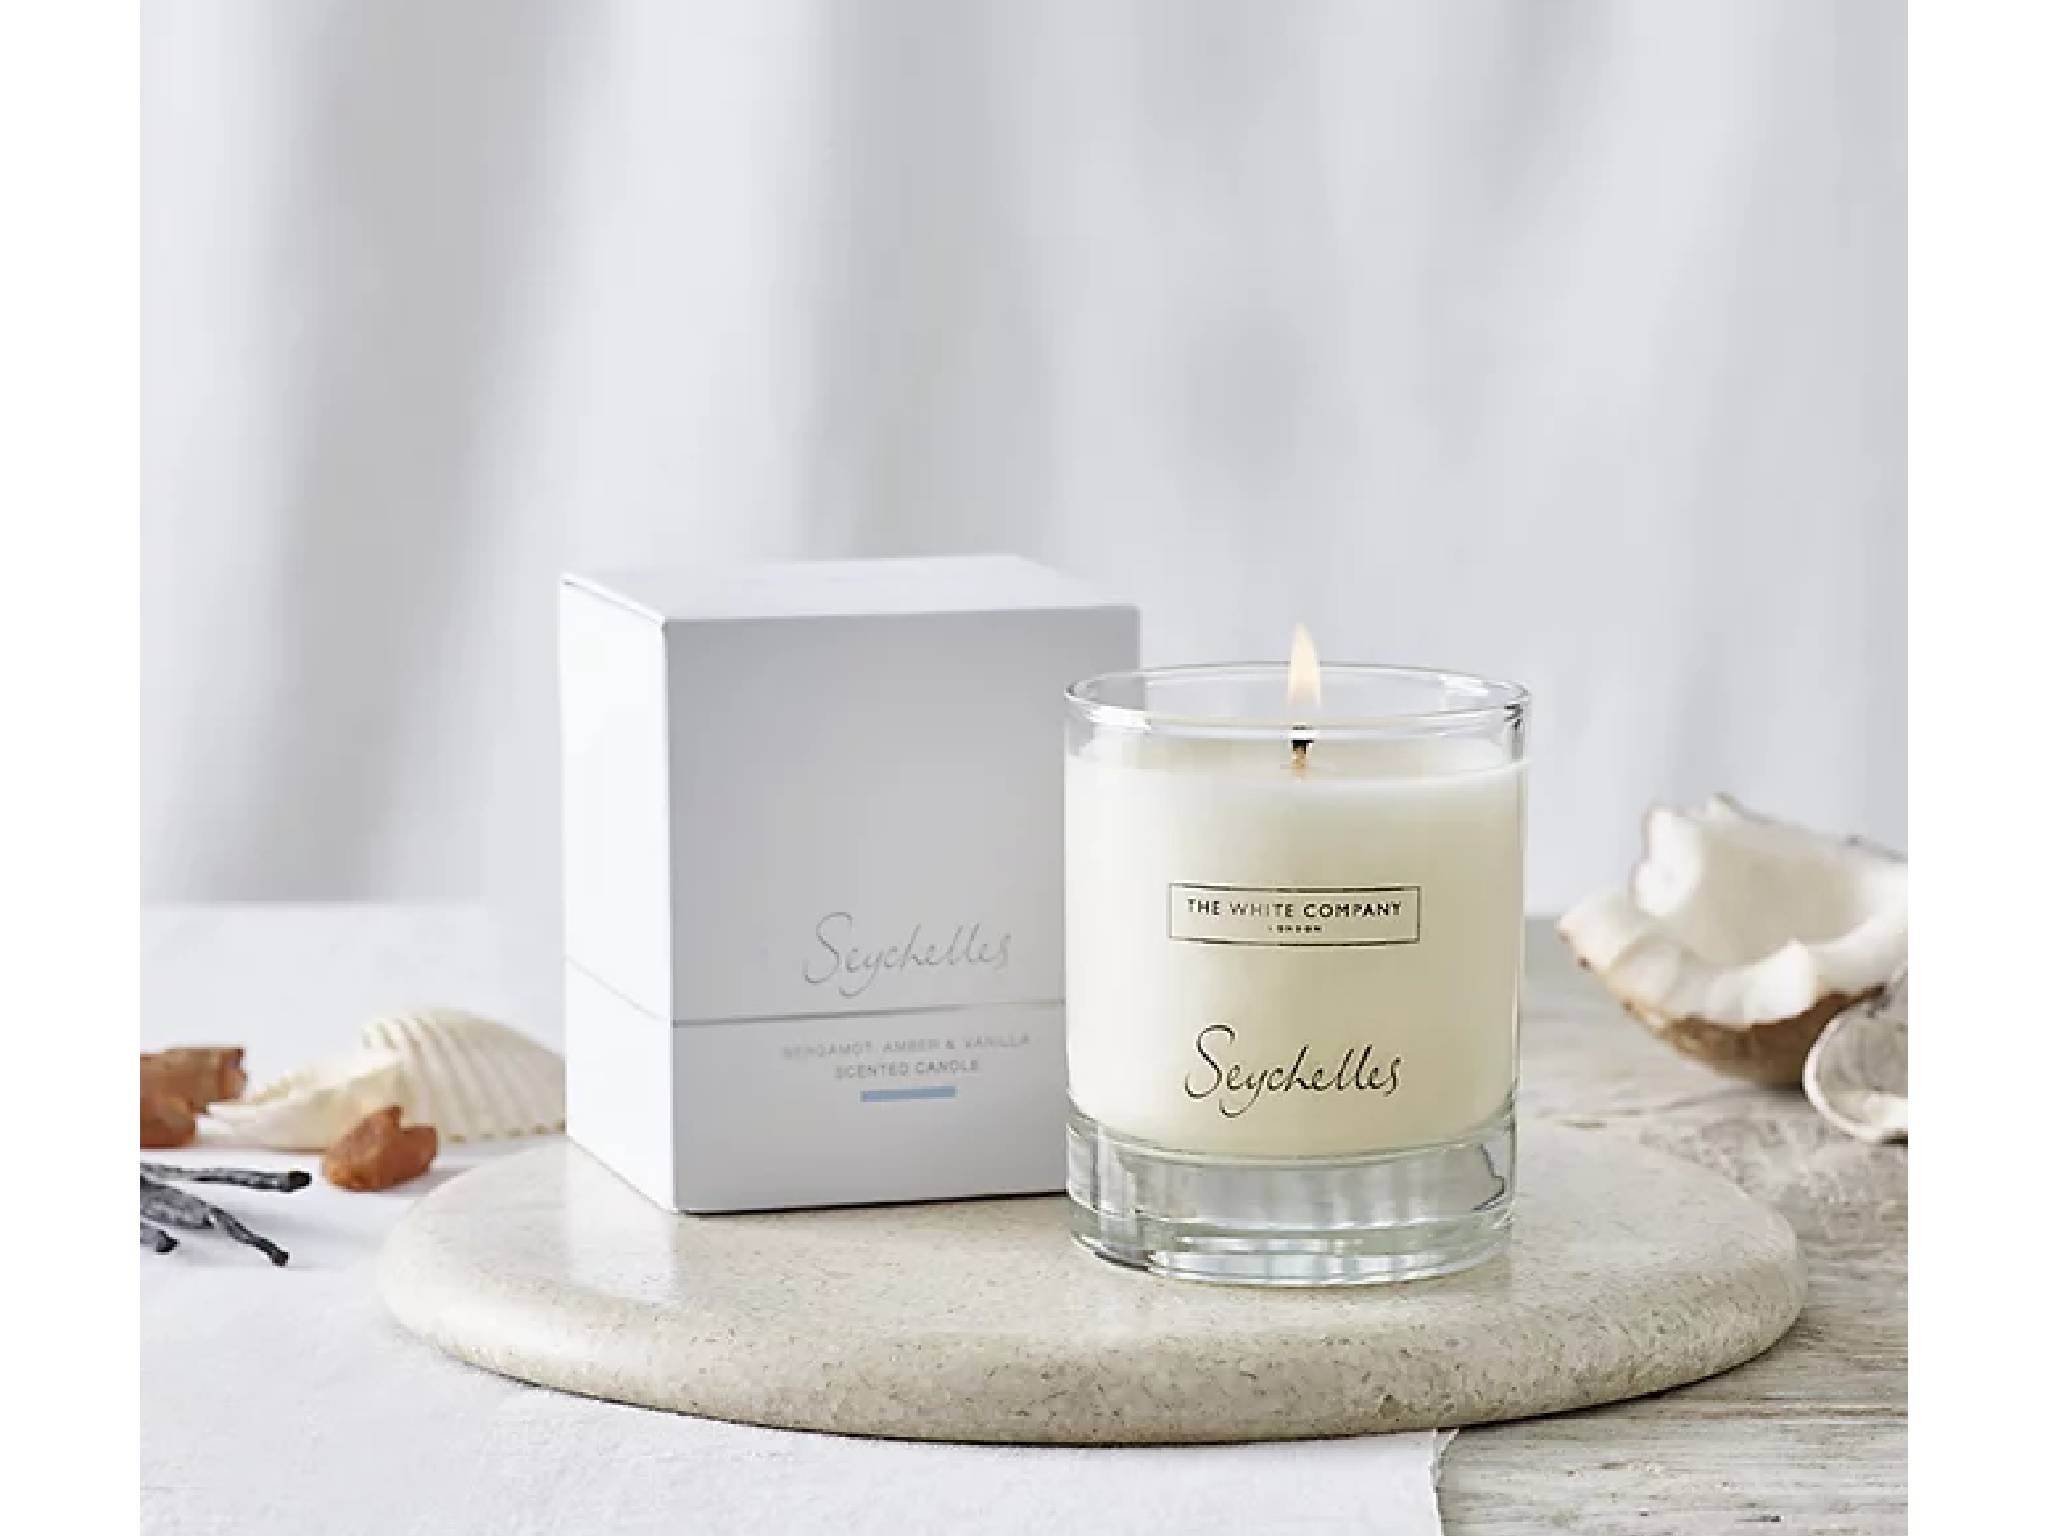 The White Company Seychelles candle